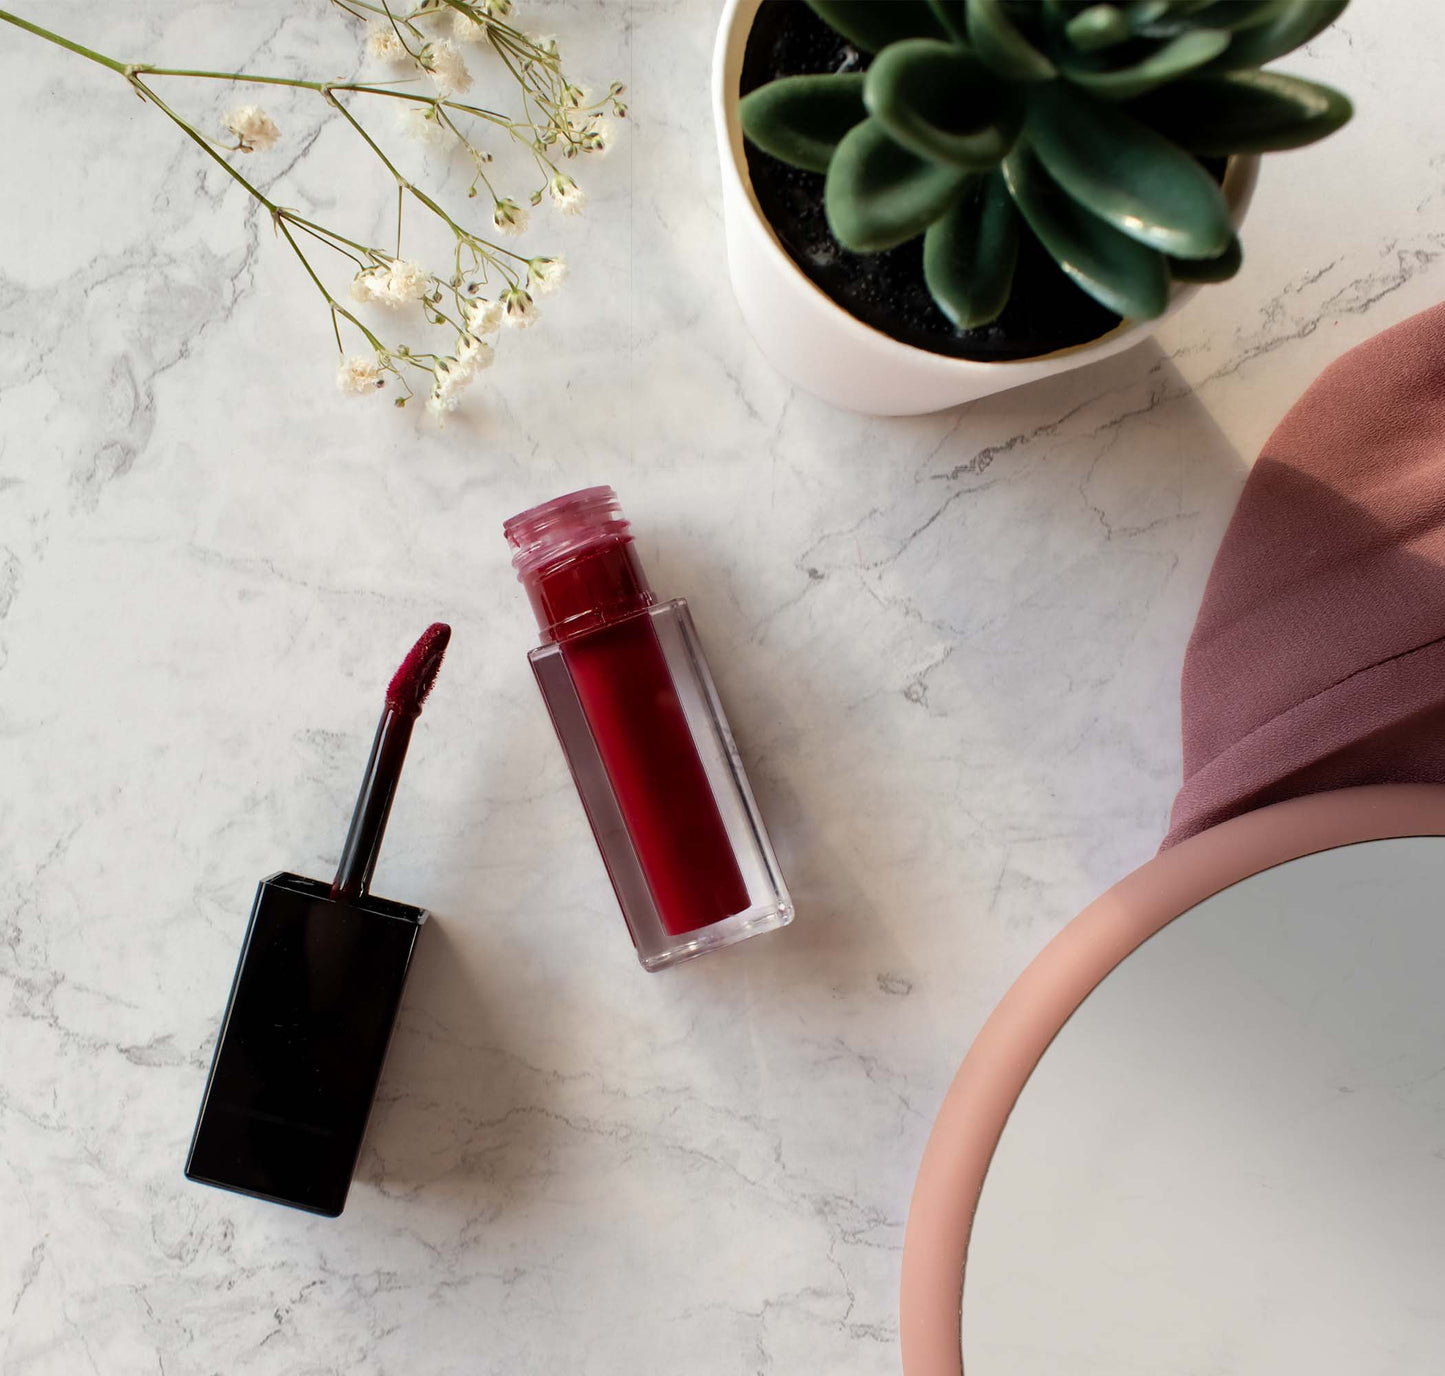 Introducing our True Crimson Matte Lip Stain, a rich red shade made from the natural Kermes vermilio dye. Enjoy its long-lasting wear and moisturizing Vitamin E formula. Get the perfect pop of bluish-red color without any harmful ingredients. Enhance your look with a beautiful and natural hue!